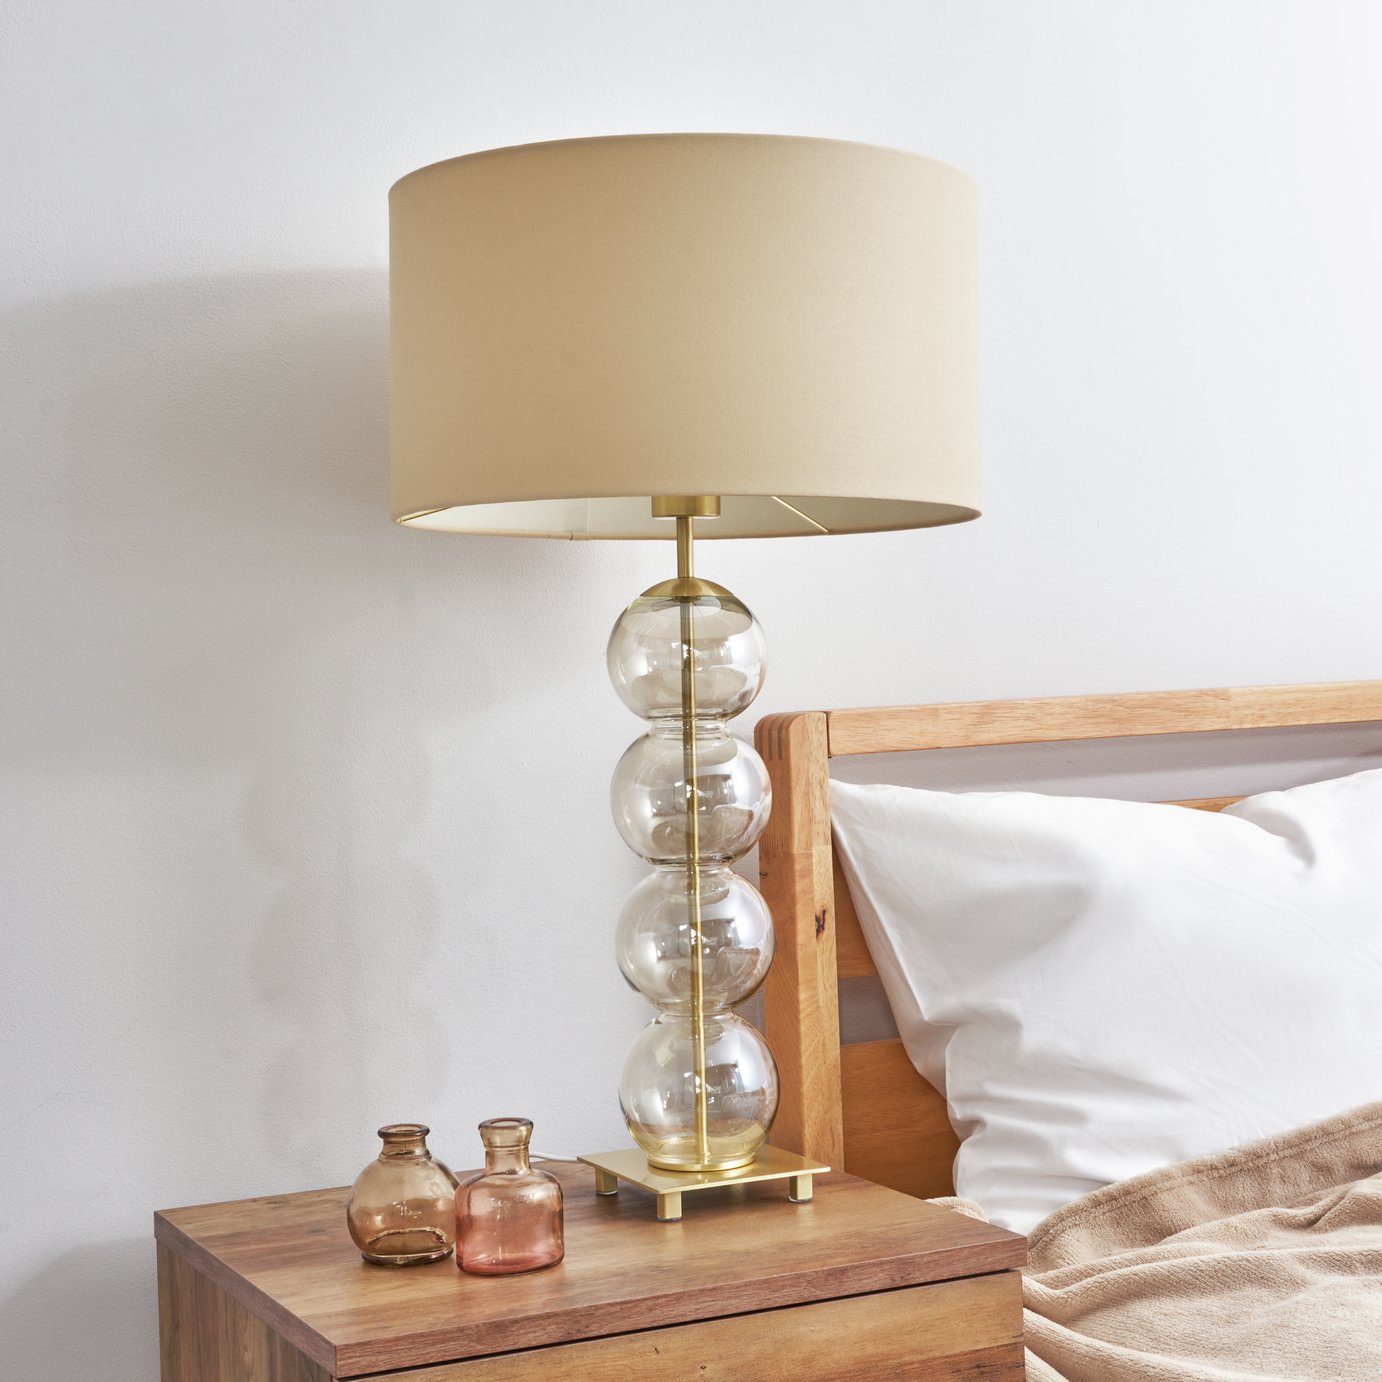 BHS Joni Ball Stacked Steel Table Lamp - Champagne